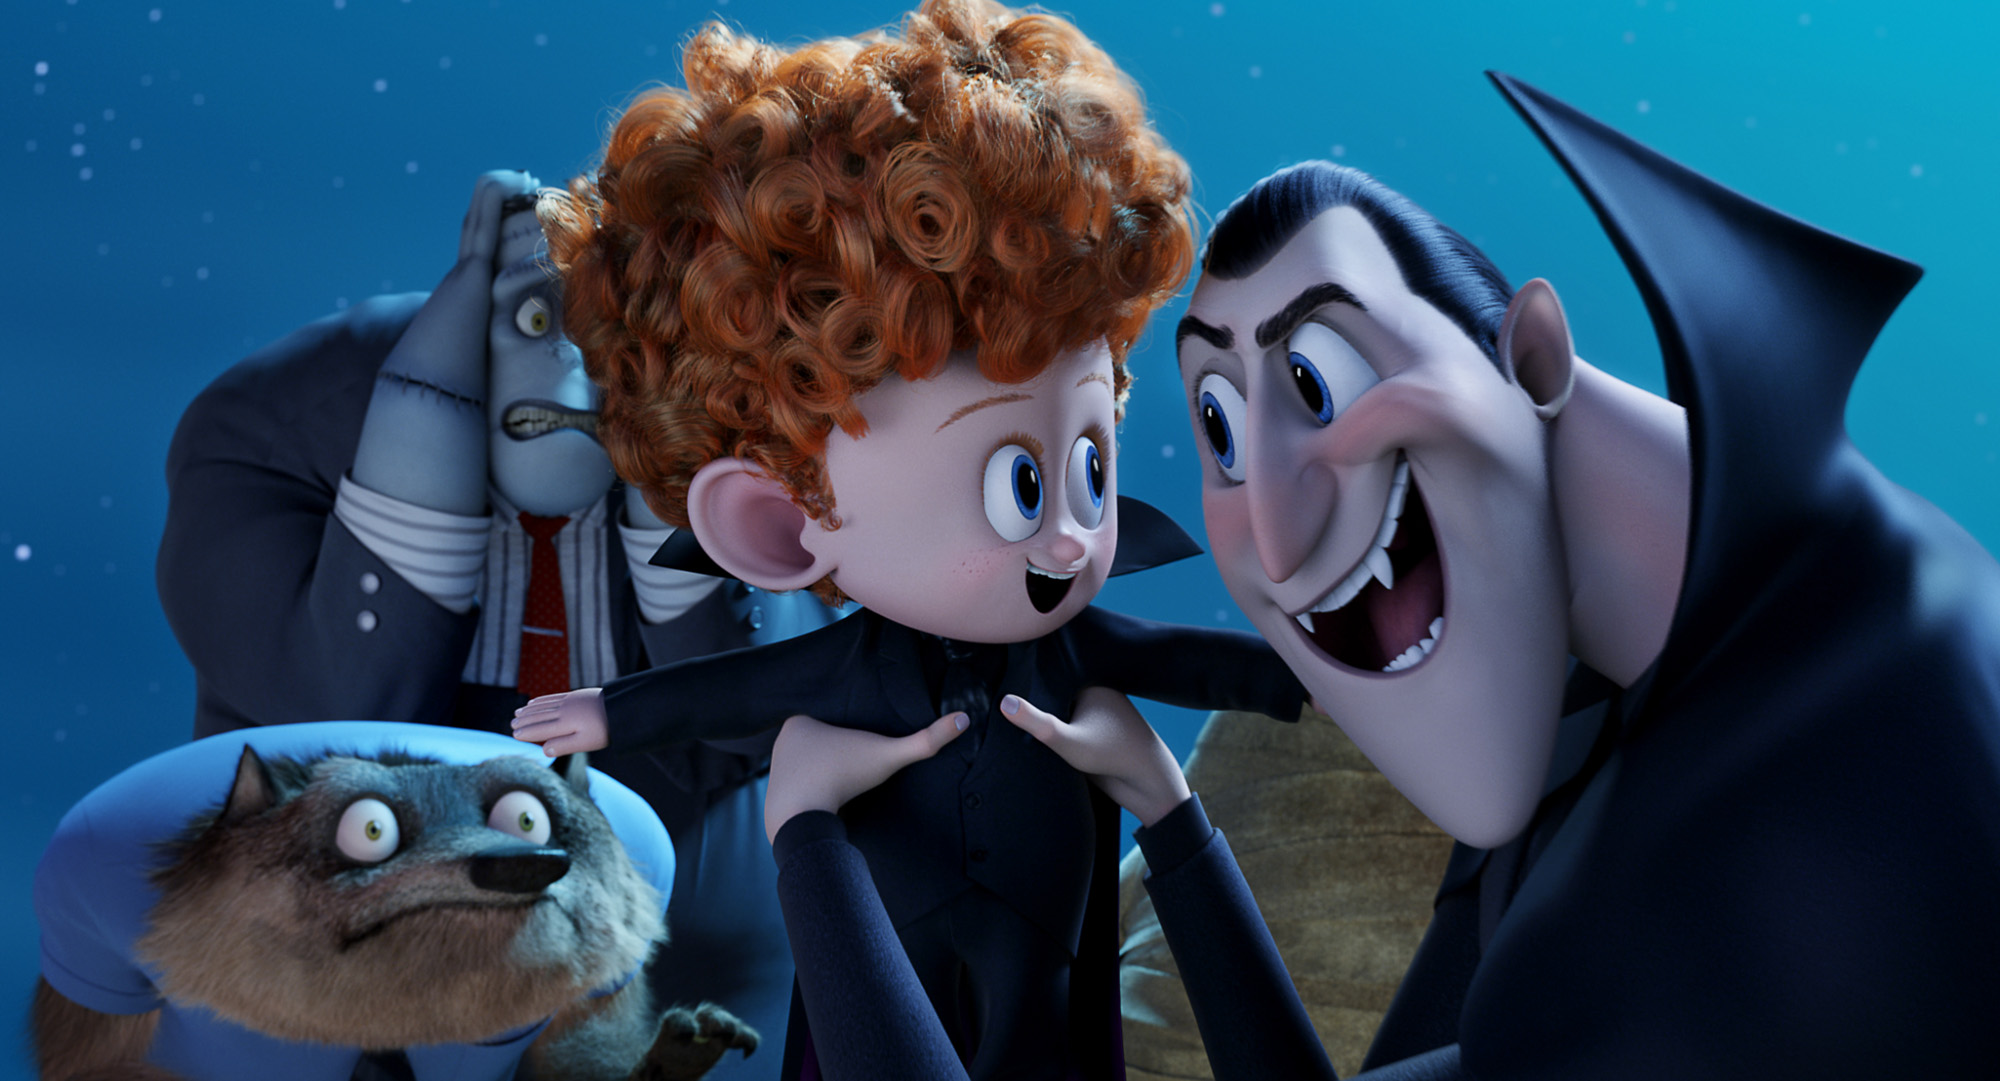 has just unveiled a new trailer for Hotel Transylvania 2, the sequel to the...